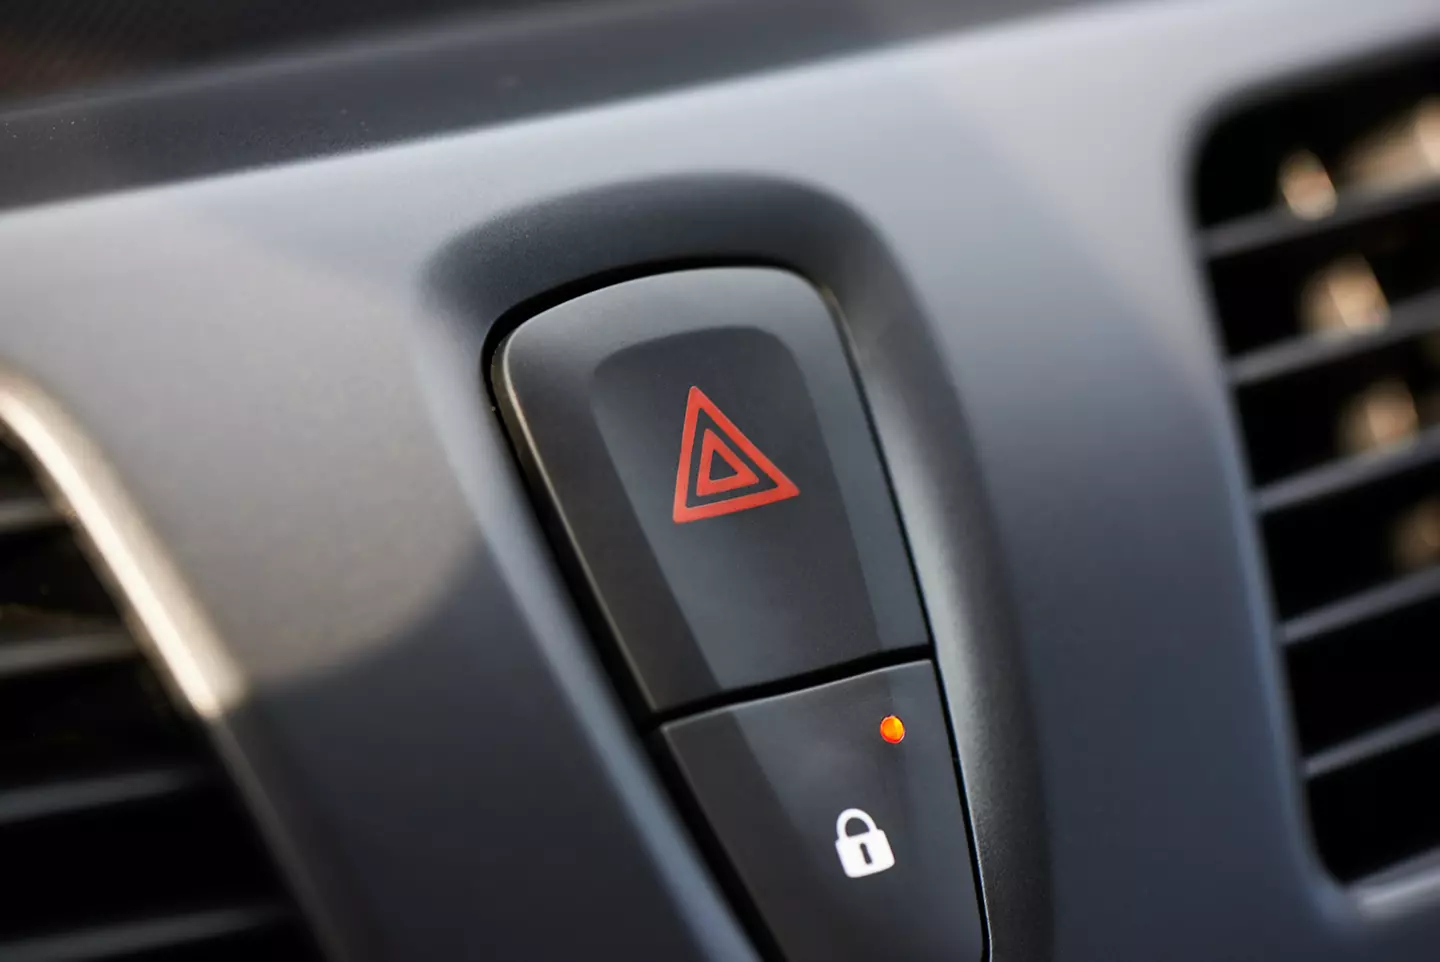 hazard warning light button for warning other drivers that the vehicle is a temporary obstruction